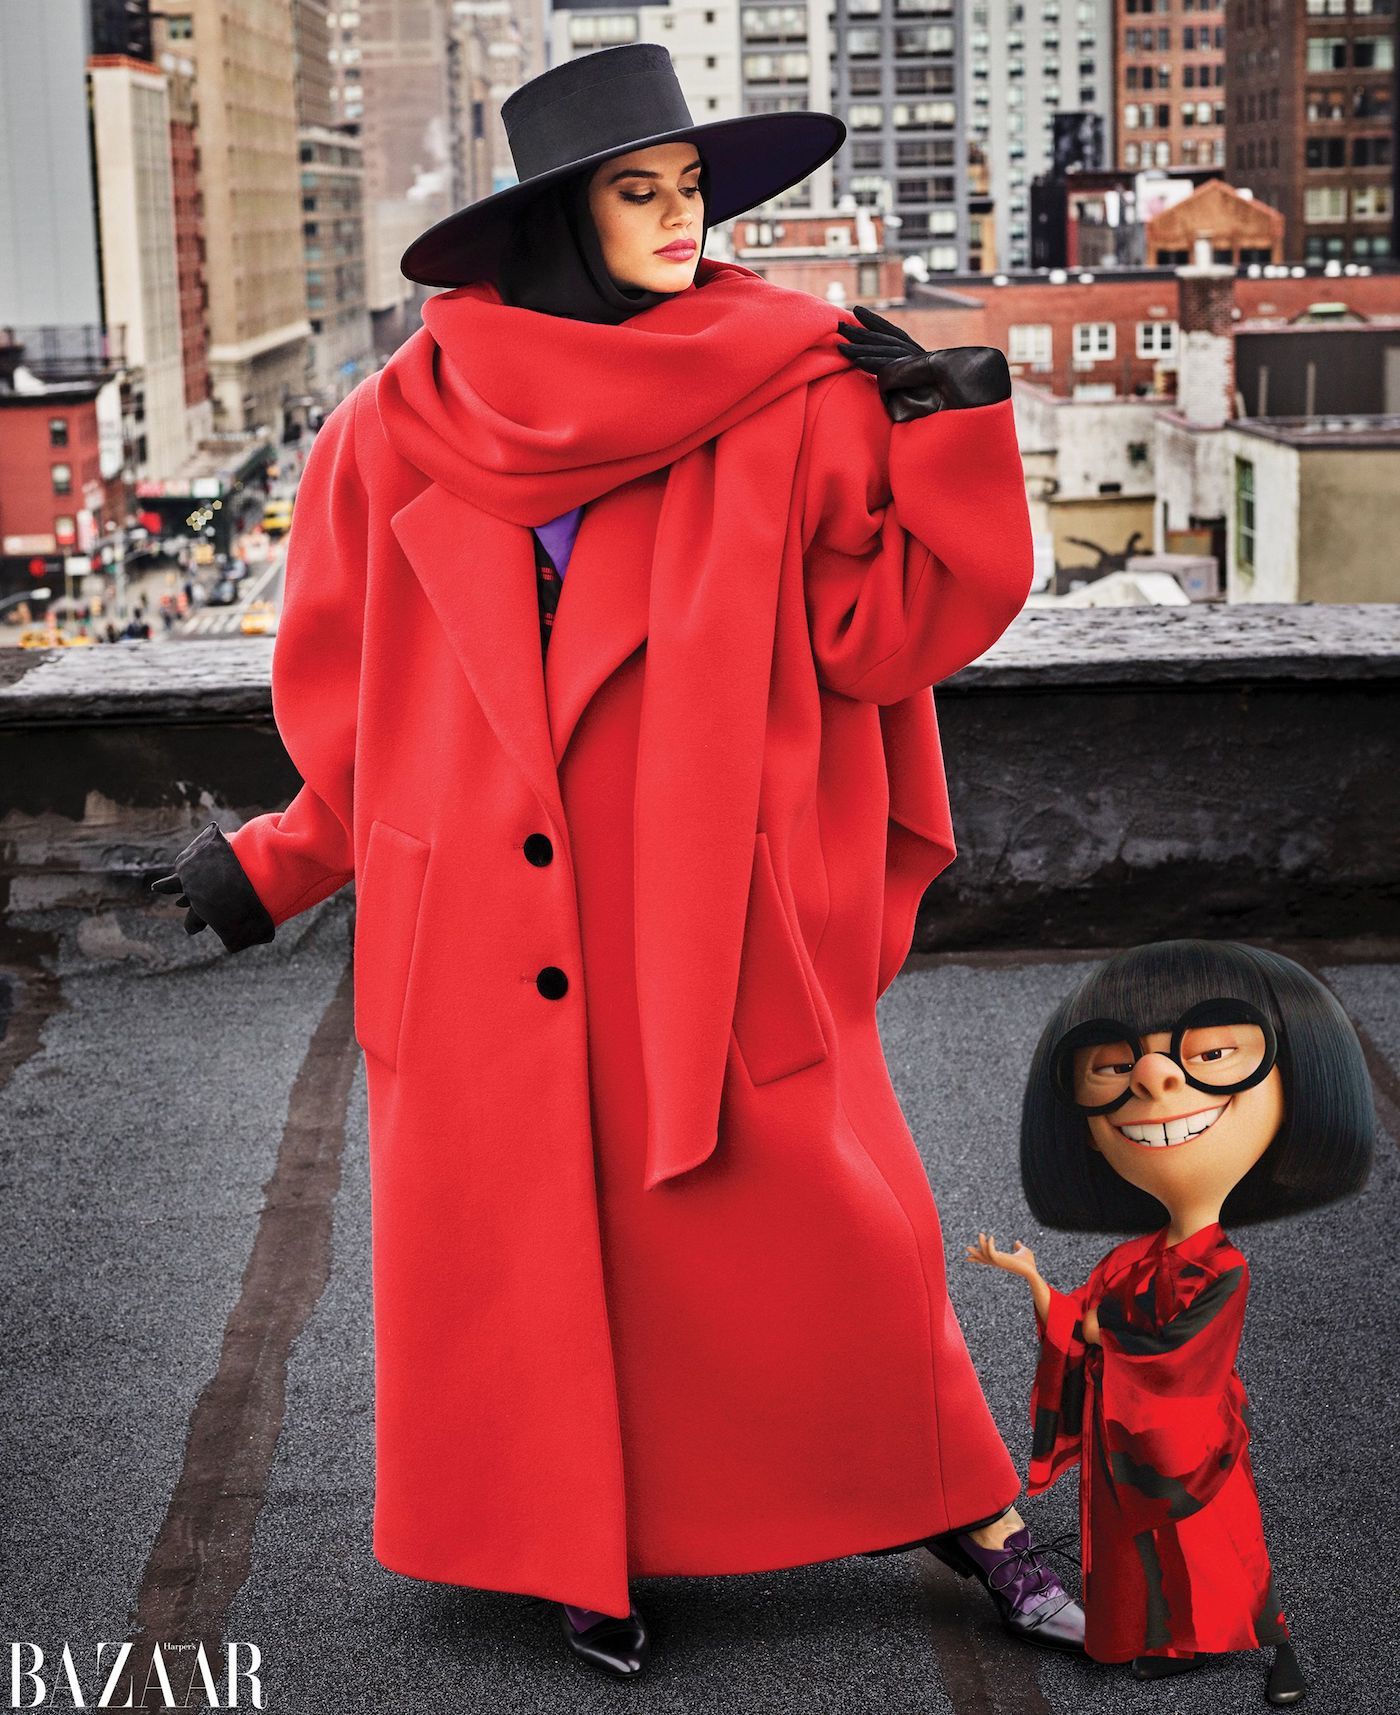 Outfit style from Edna Mode's Interview in Harper's Bazaar